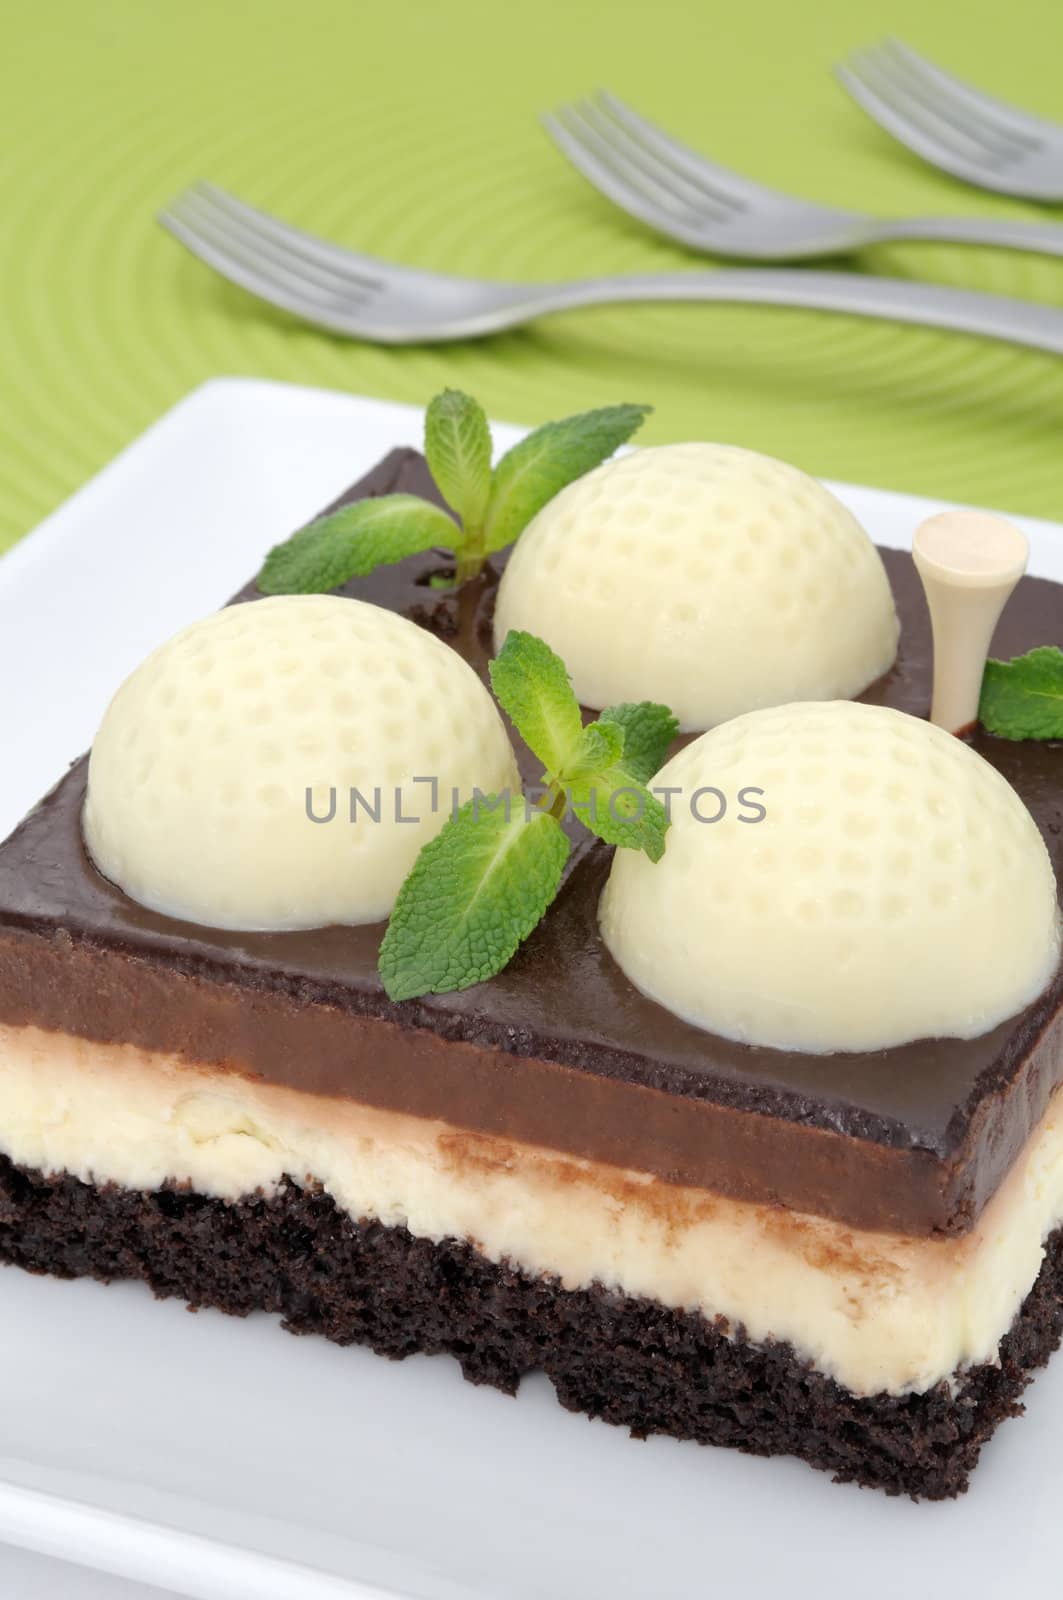 Golf cake with mint by Hbak